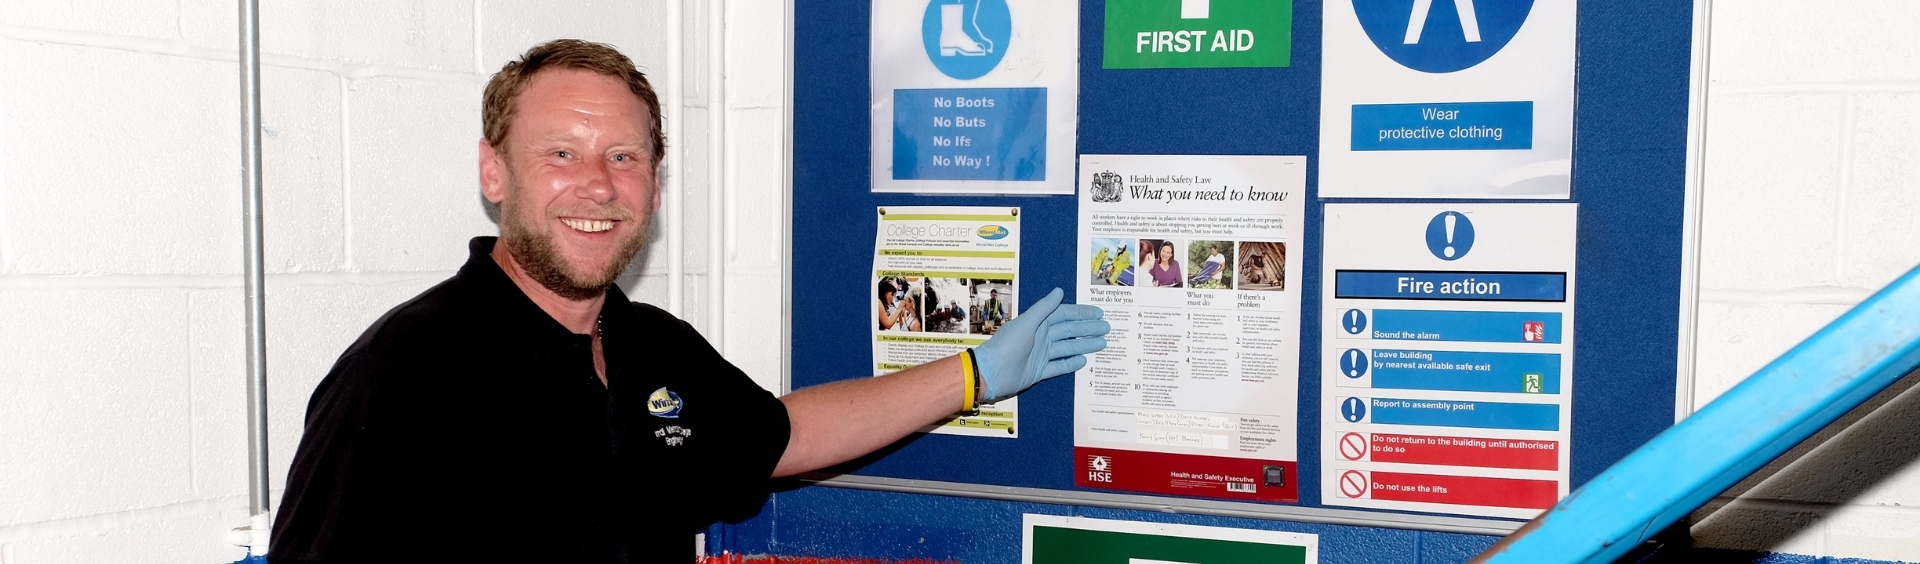 WMC Alcohol Awareness student pointing at health and safety noticeboard